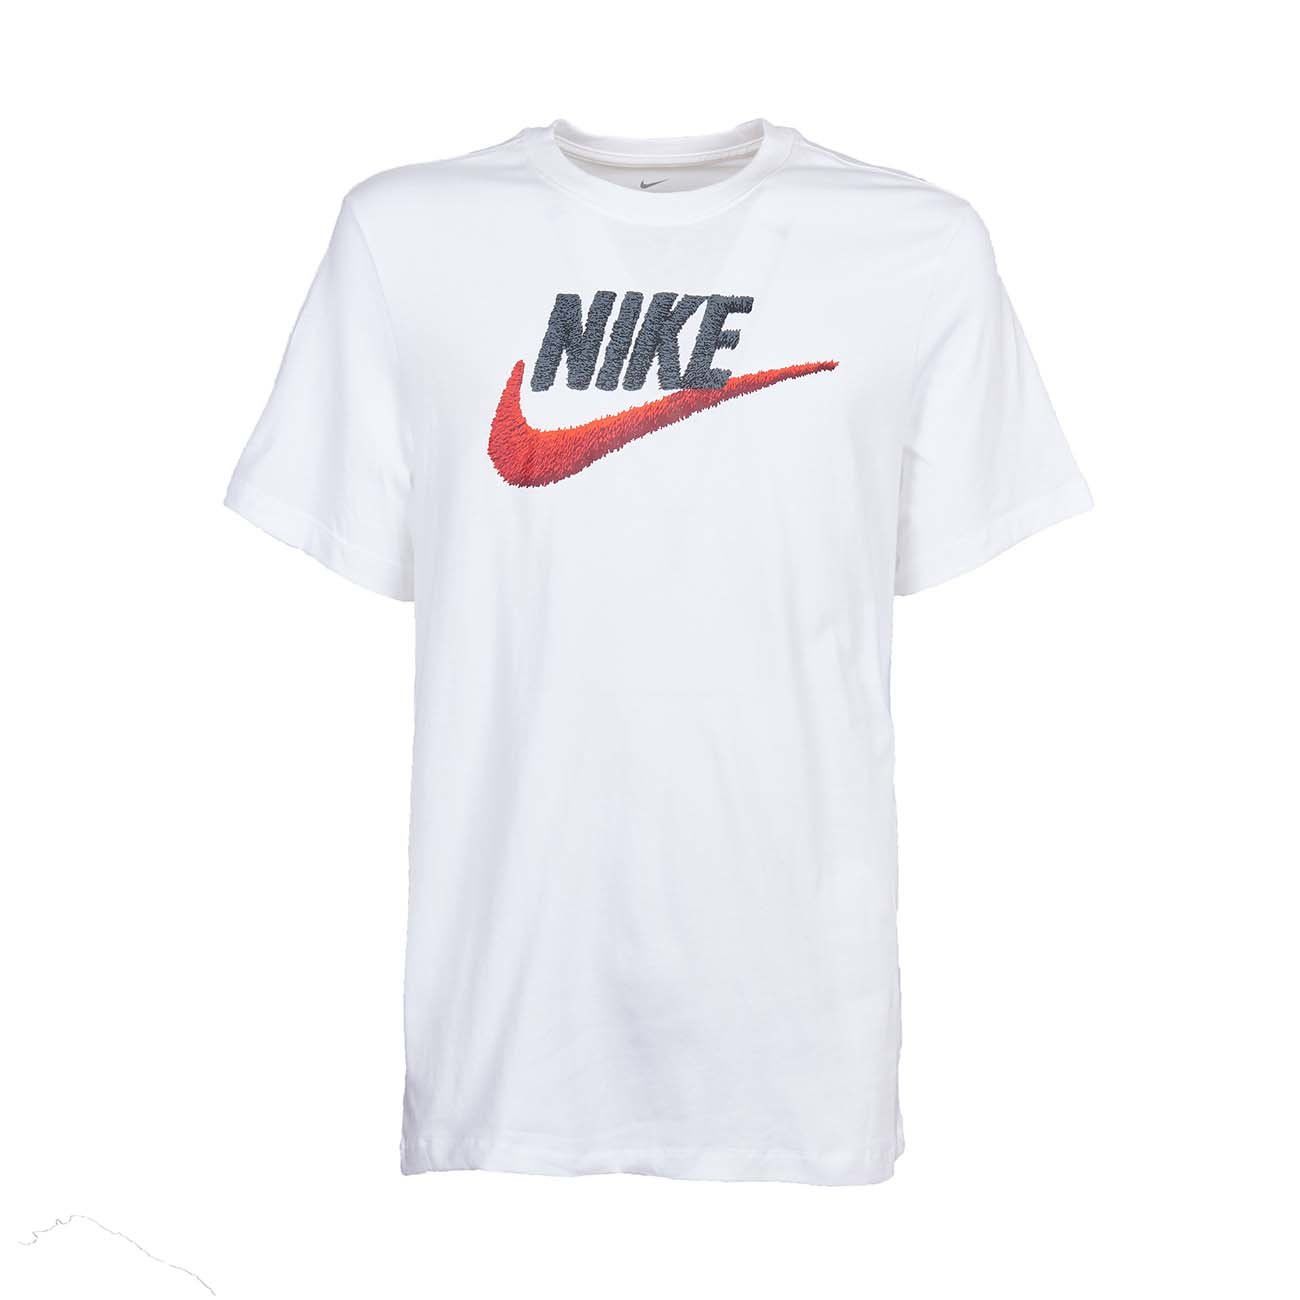 nike shirt black and red